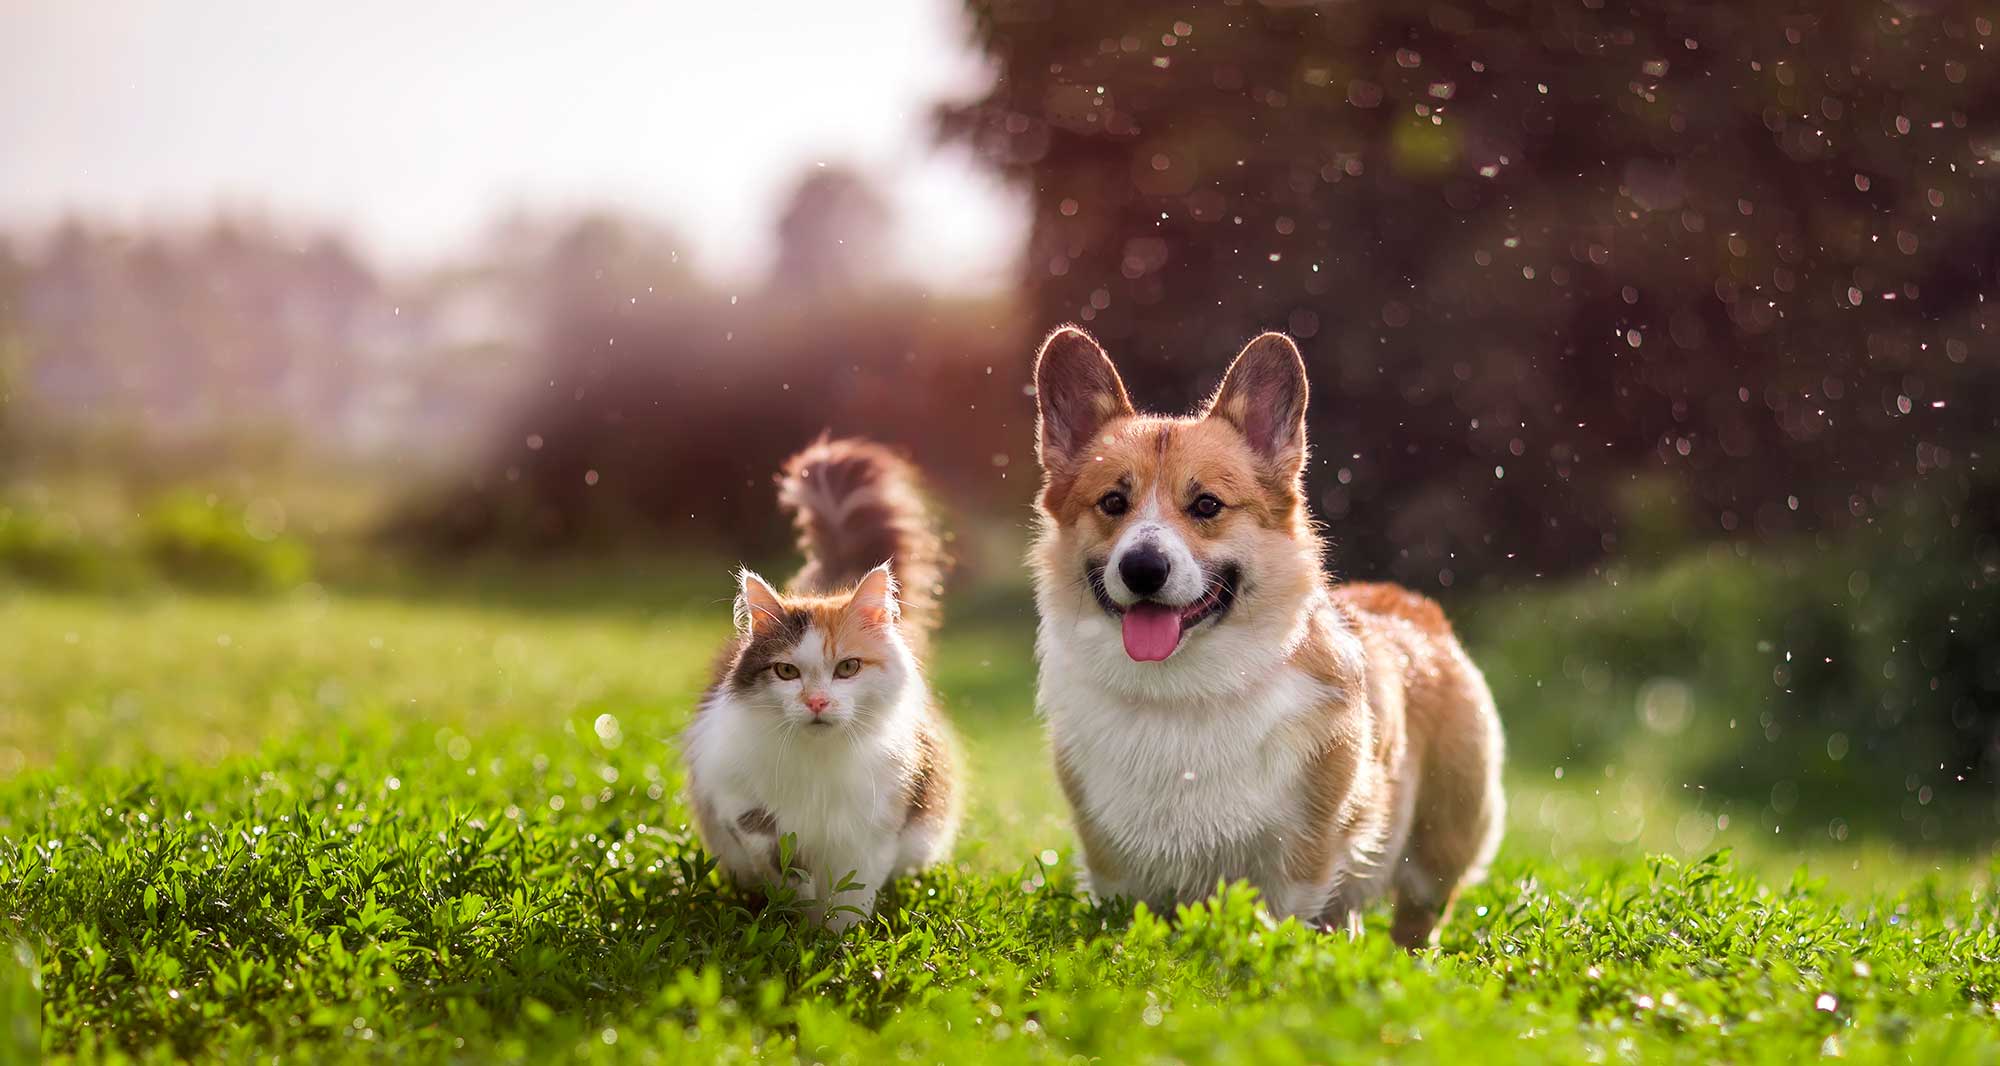 A dog and cat running in a field